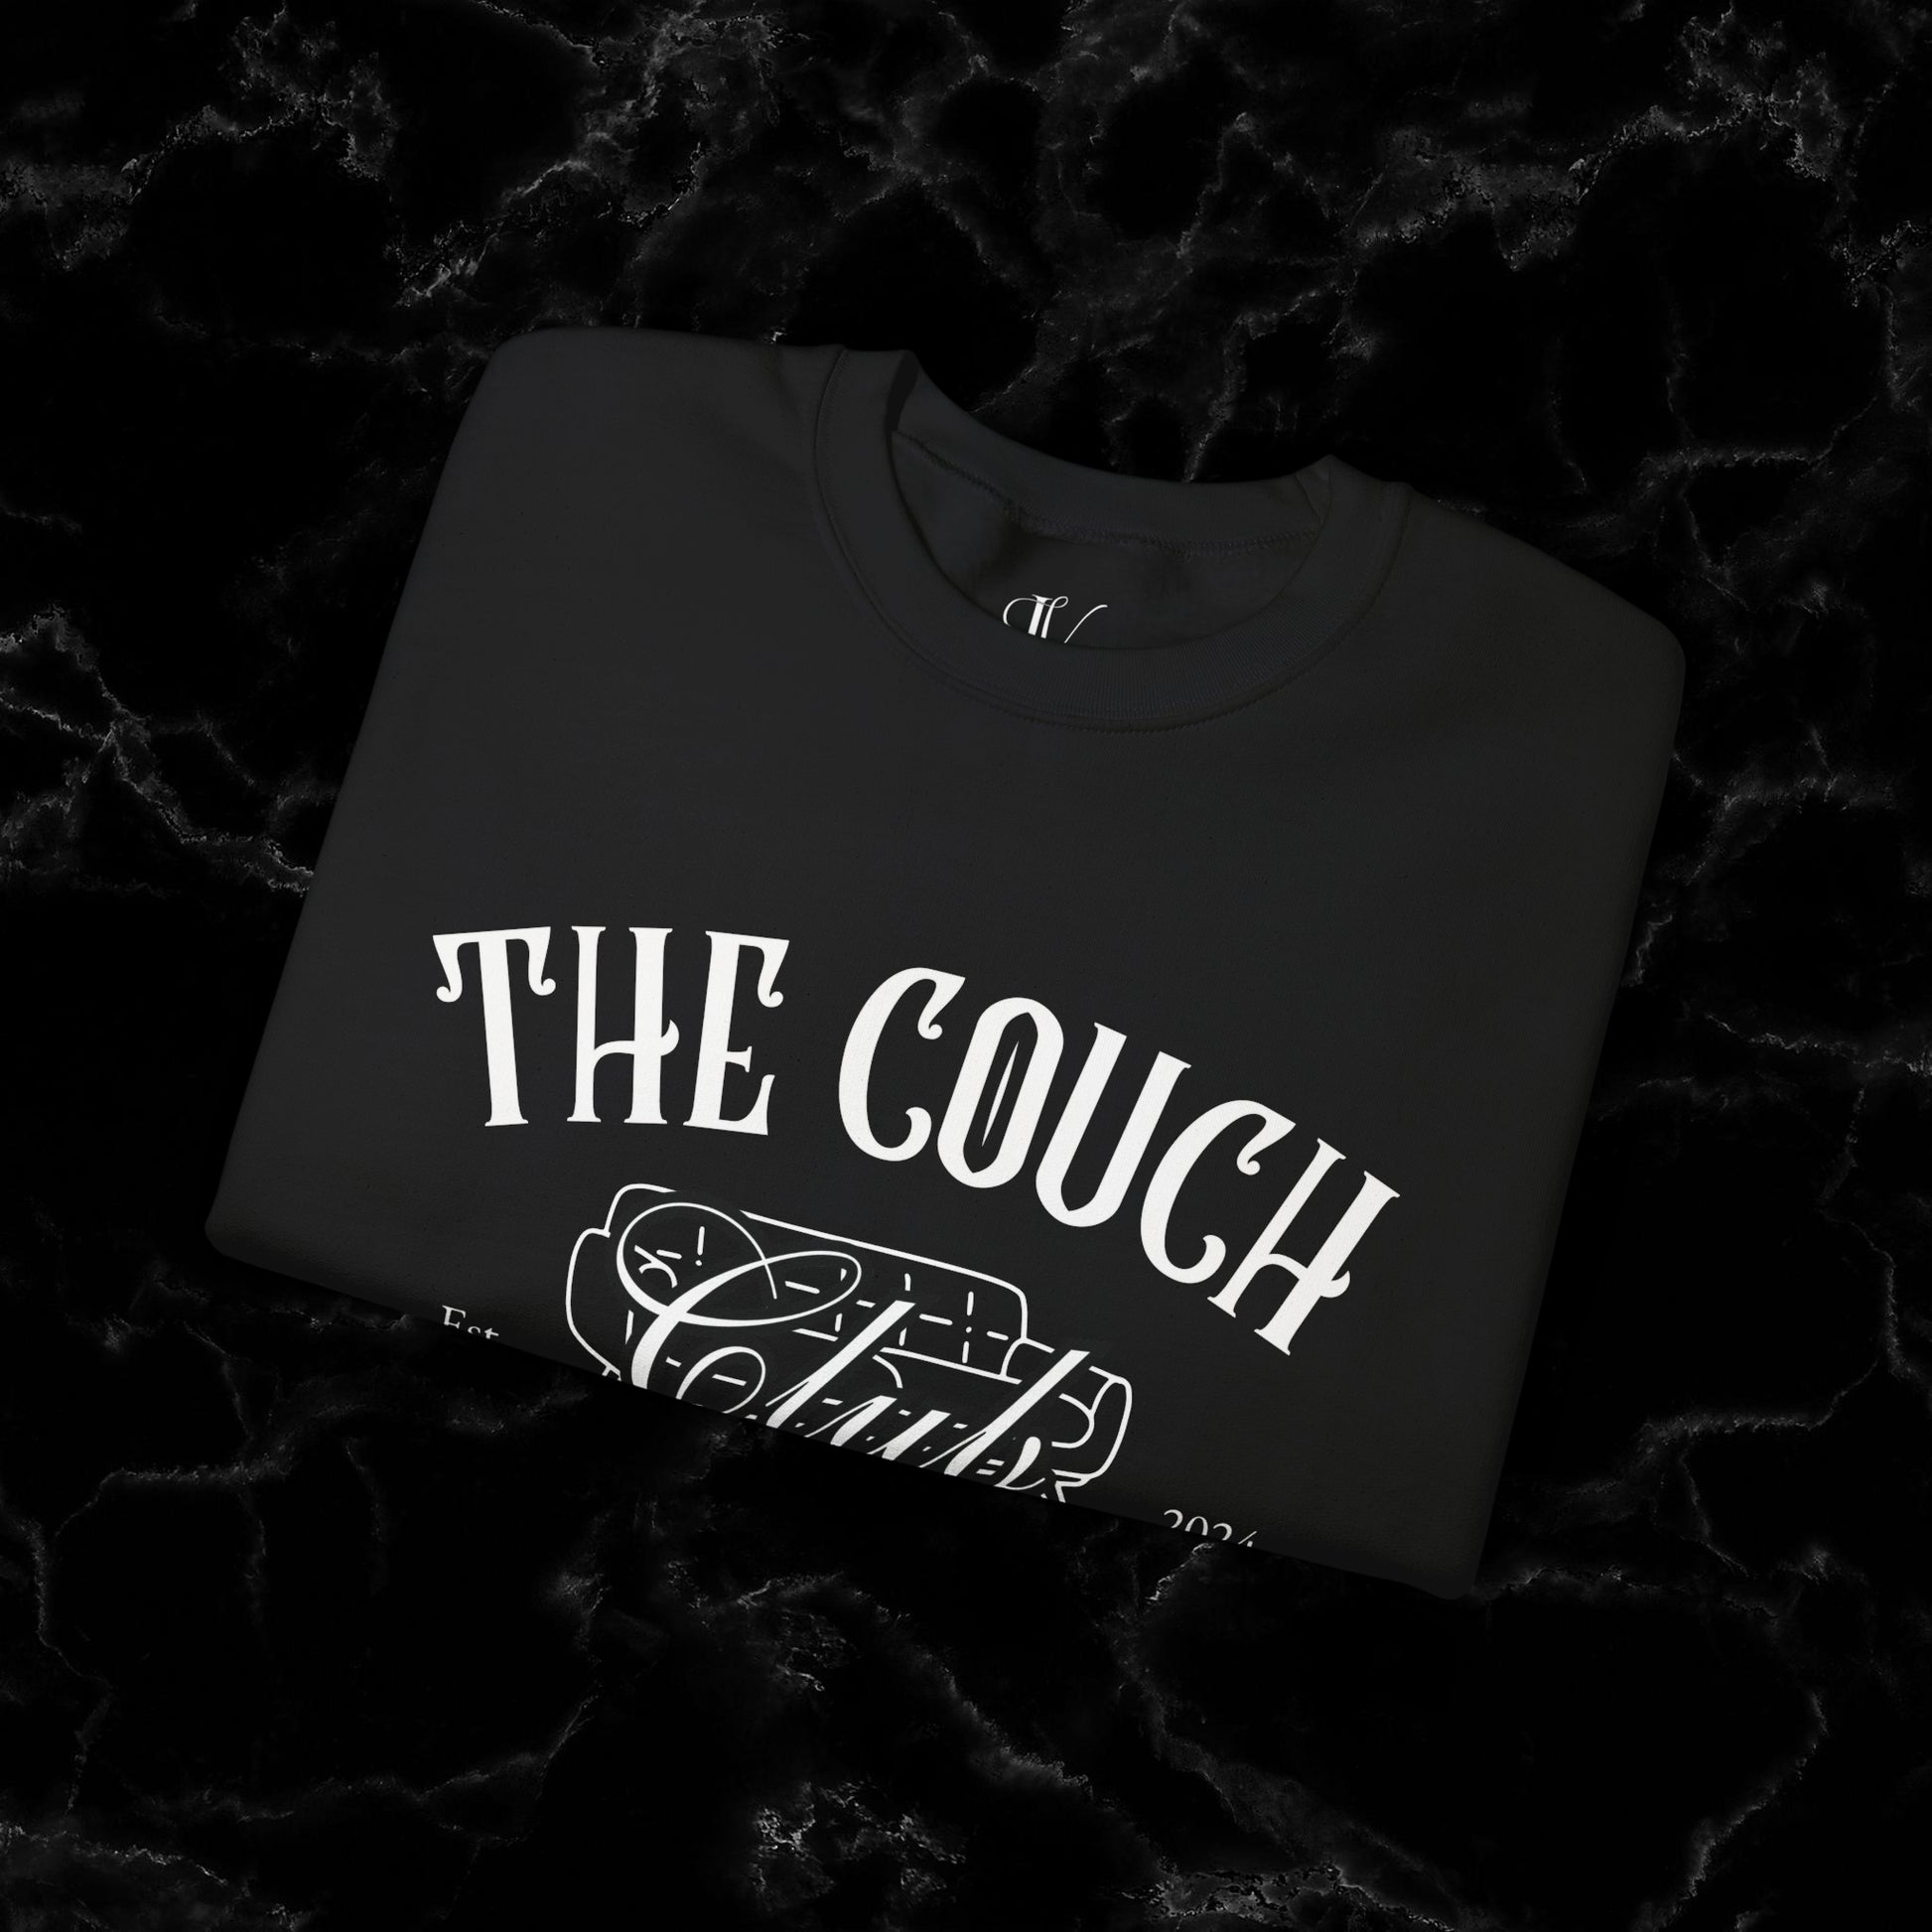 The Couch Club Crewneck Sweatshirt – Funny, Vintage, and Oversized: The Perfect Gift for Her and Your Best Friend Sweatshirt   